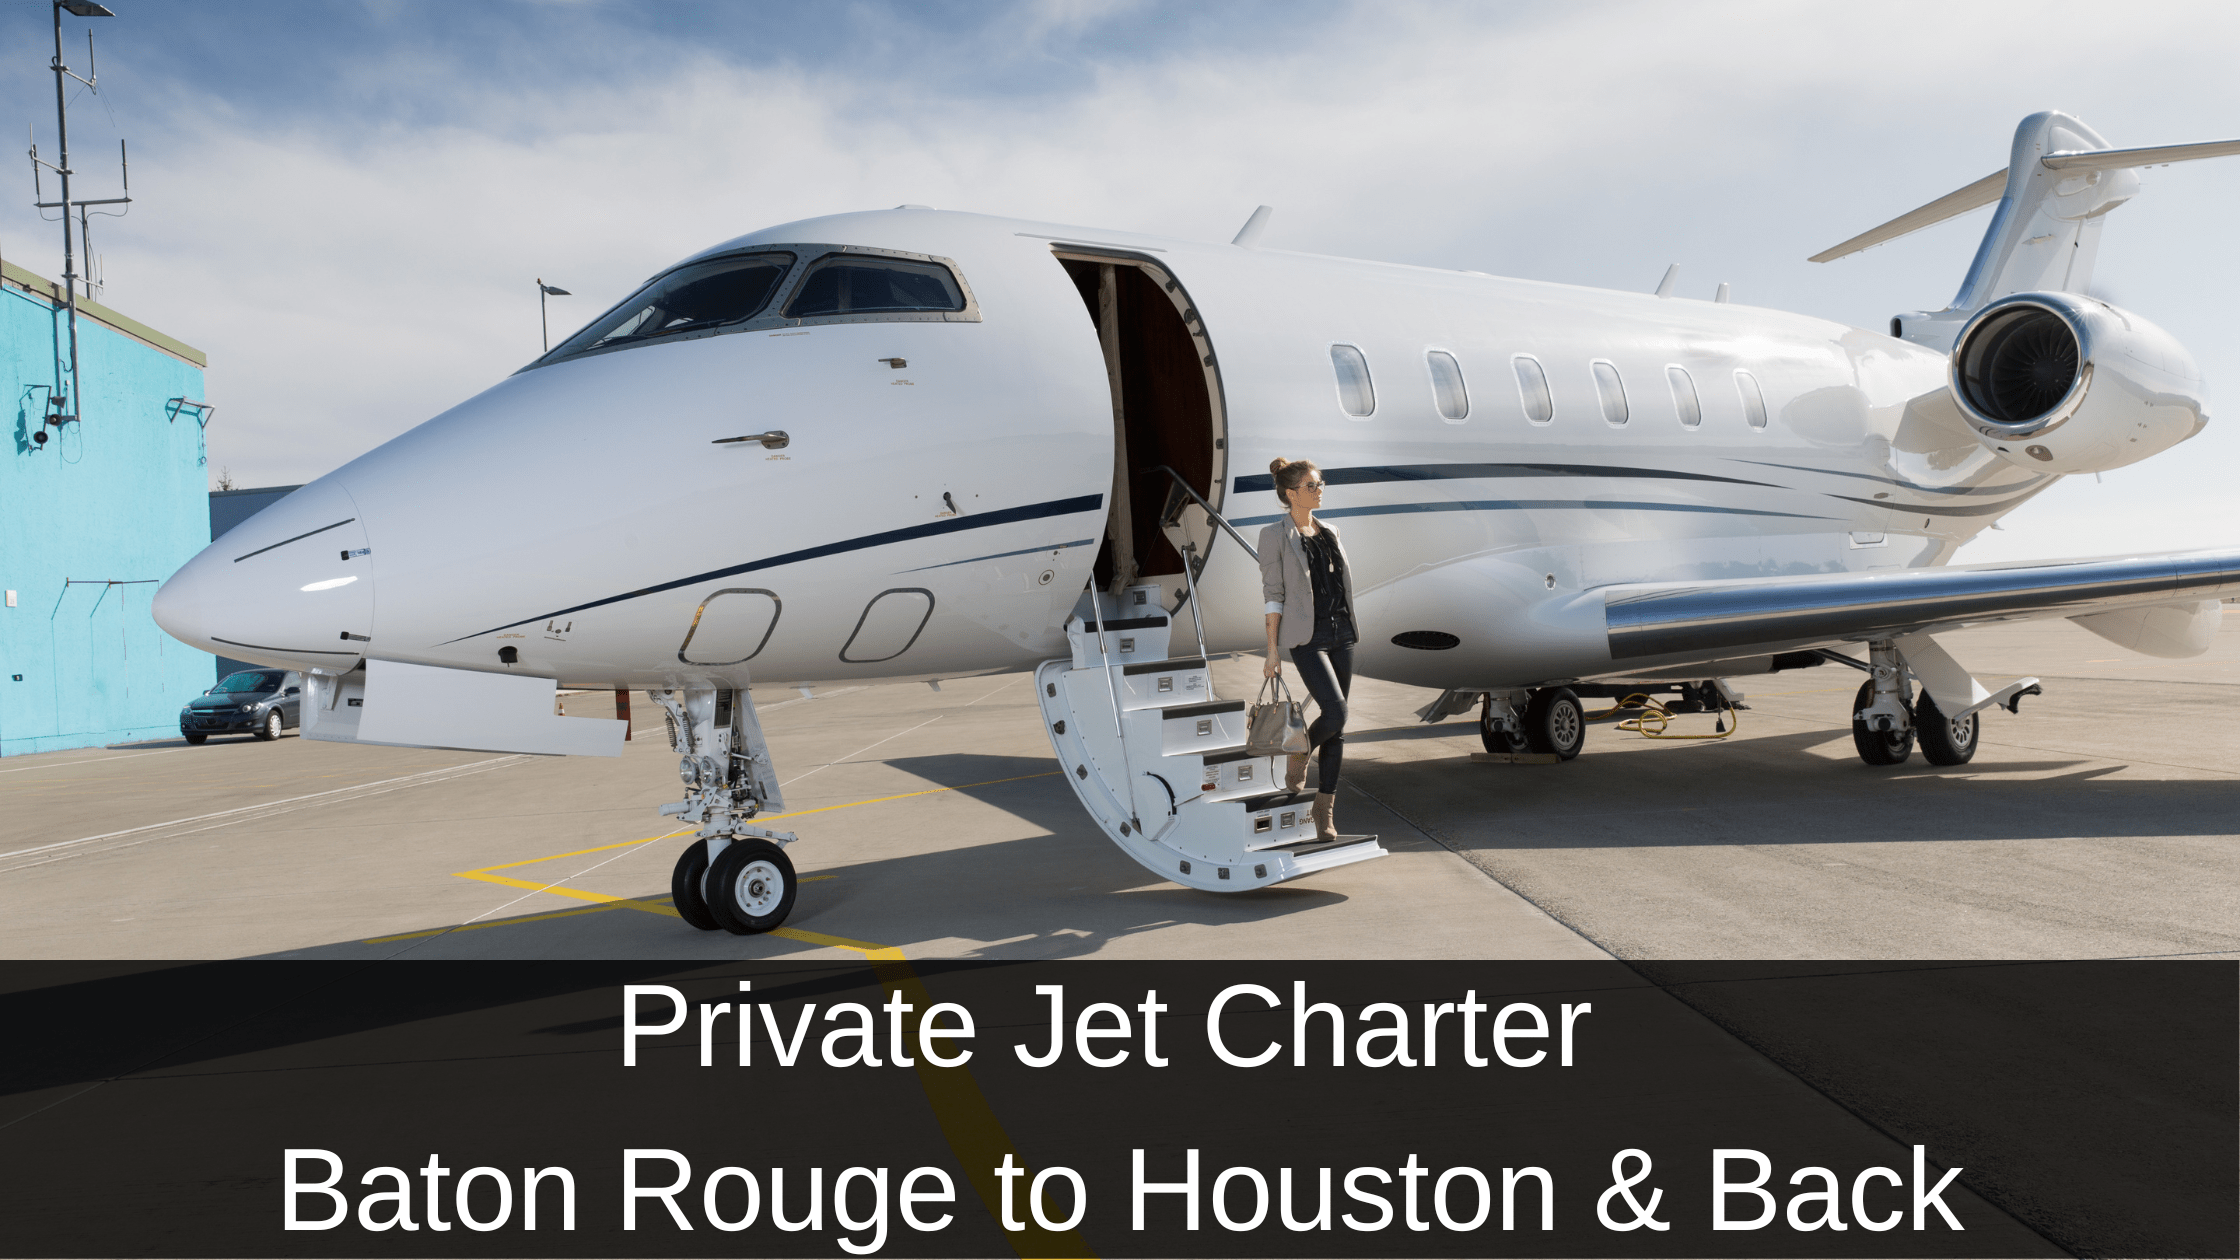 Private Jet from Baton Rouge to Houston & Back